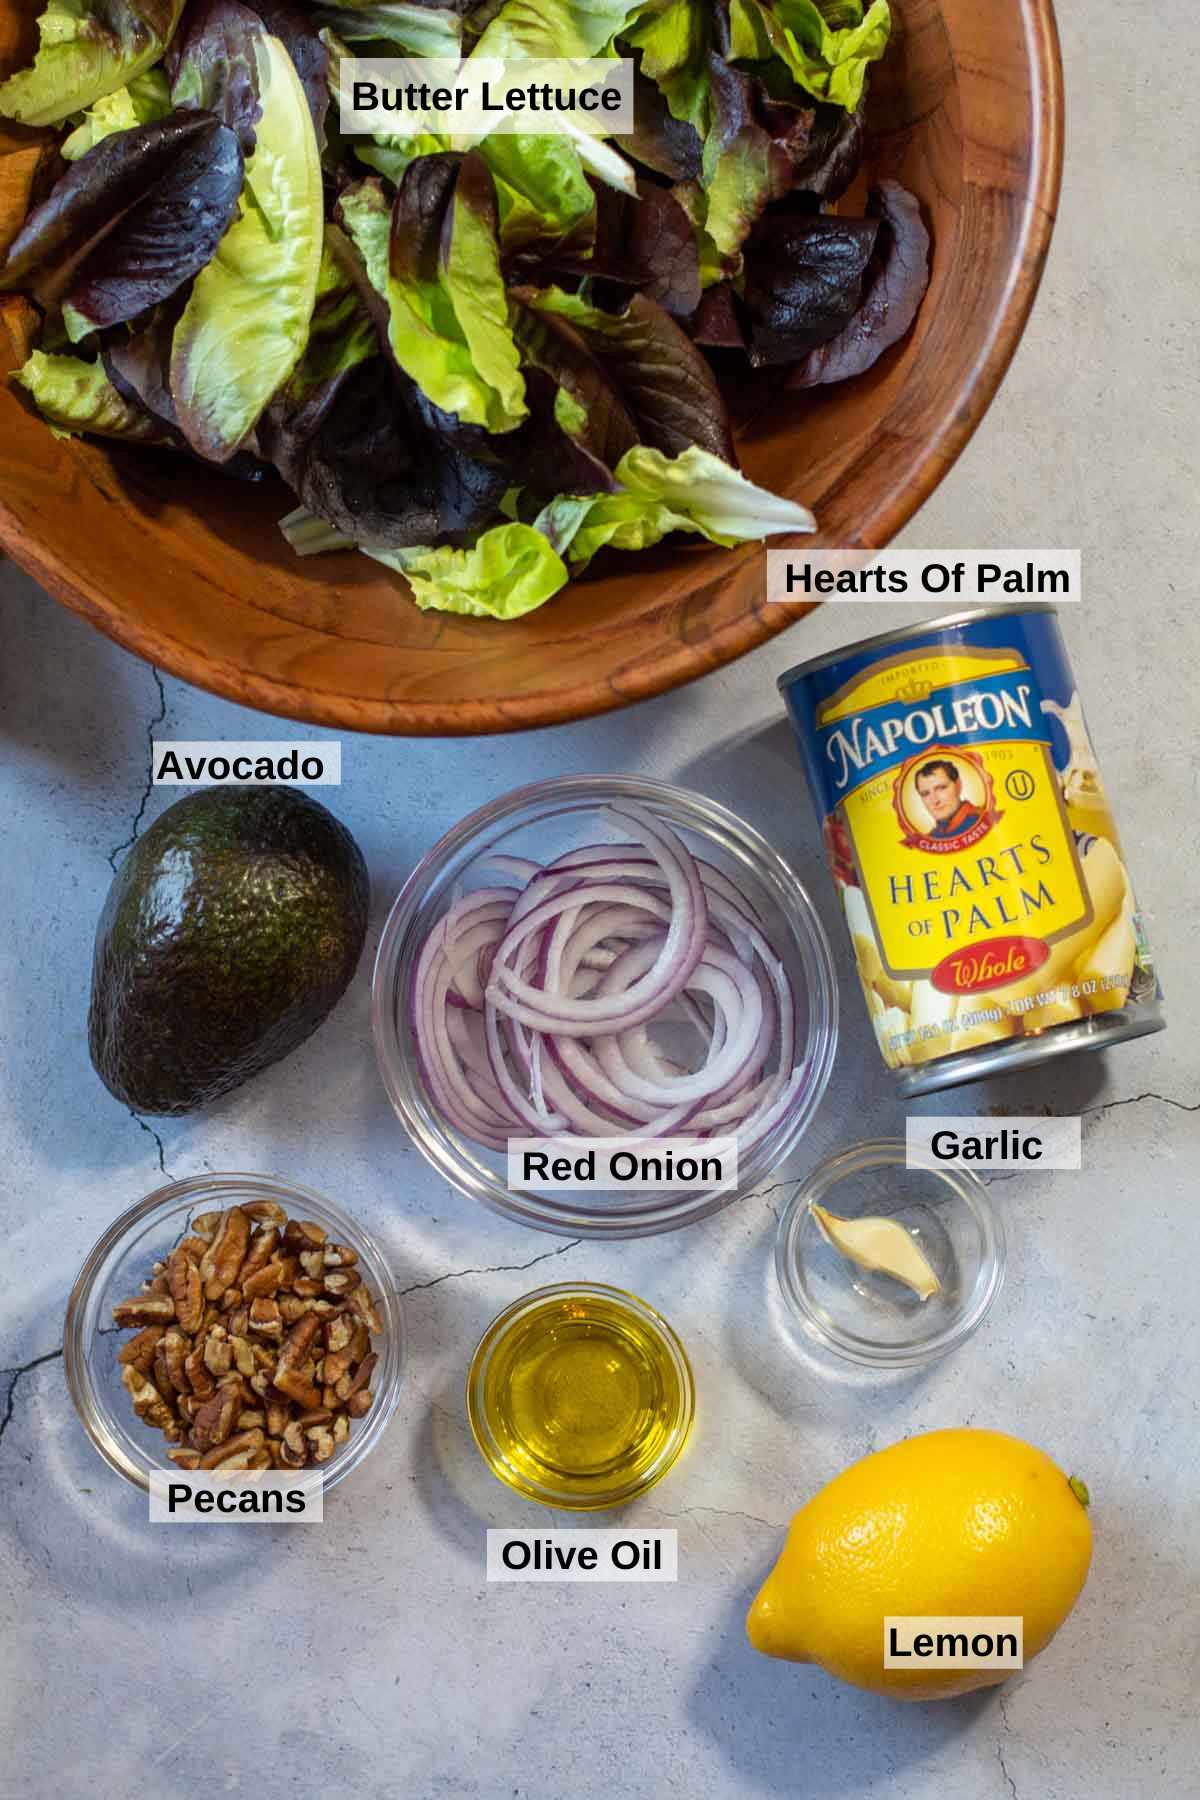 Ingredients to make hearts of palm salad.